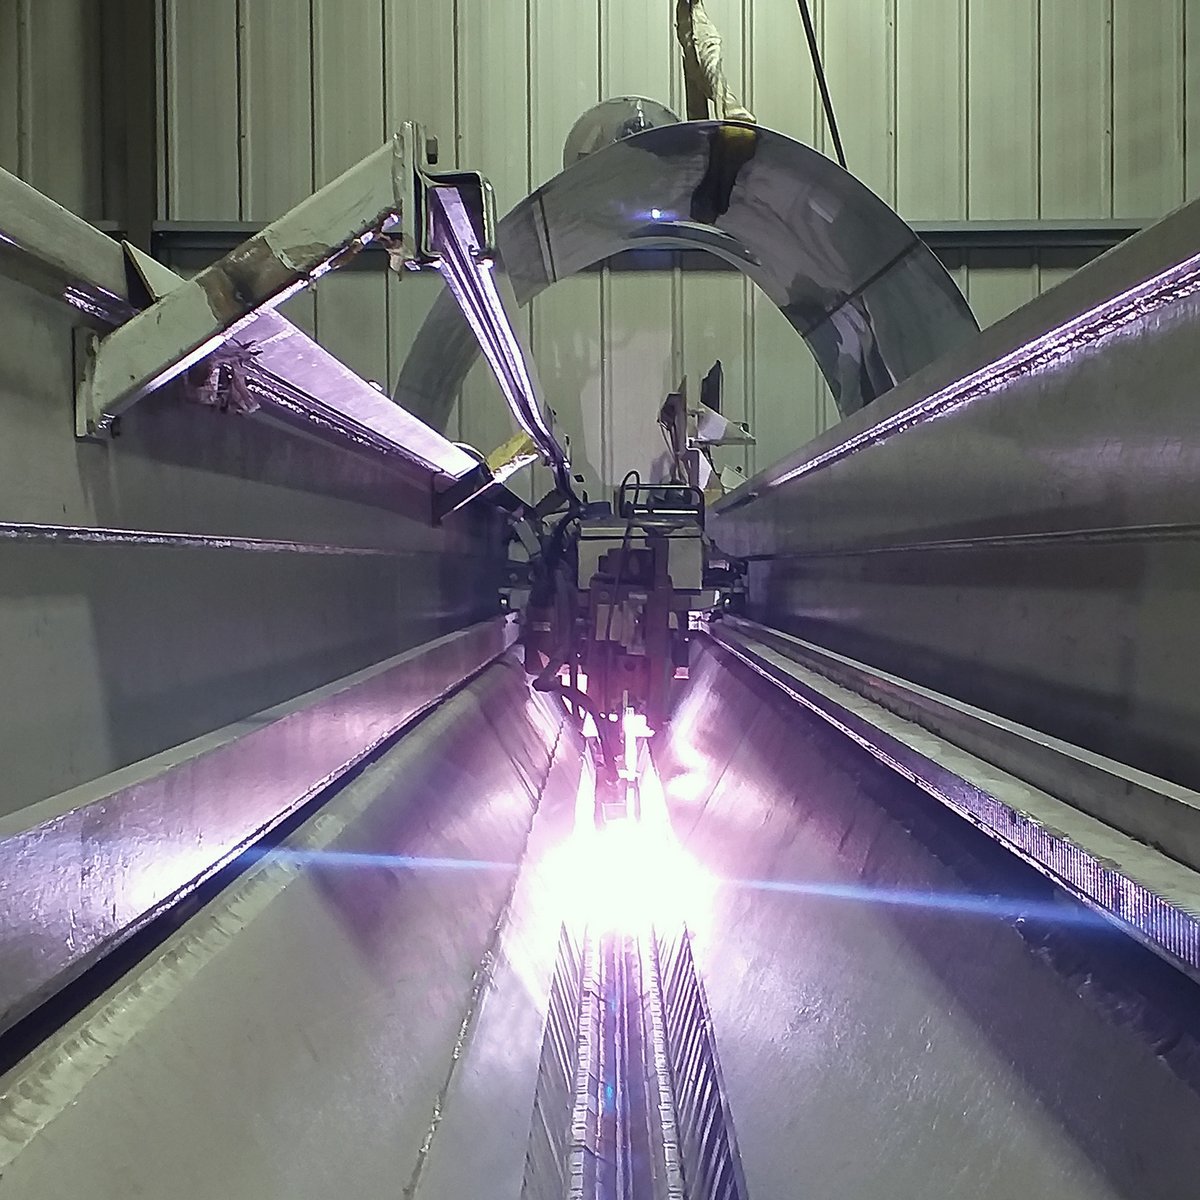 Our 6-meter Seam welder in the process of creating another air-tight, quality stainless steel vessel designed to offer extreme efficiency and outstanding reliability!

#seamwelder #seamwelding #manufacturemonday #manufacturingmonday #monday #manufacturer #fabdec #britanx #ukmfg